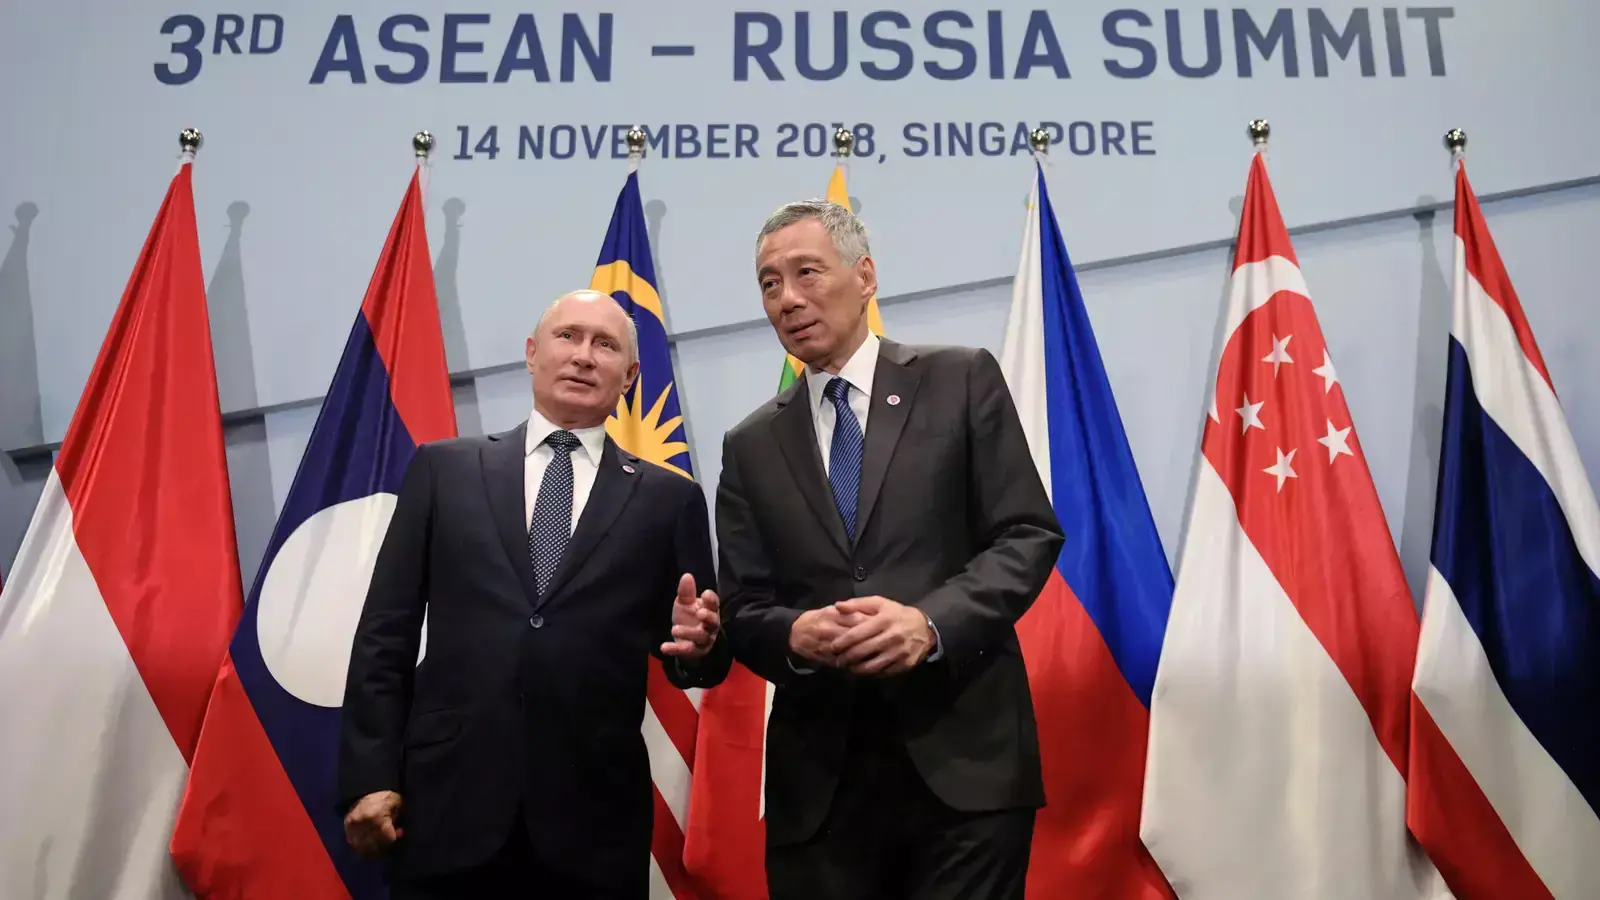 Russian President Vladimir Putin and Singapore's Prime Minister Lee Hsien Loong prepare for a group photo with ASEAN leaders at the ASEAN-Russia Summit in Singapore on November 14, 2018.